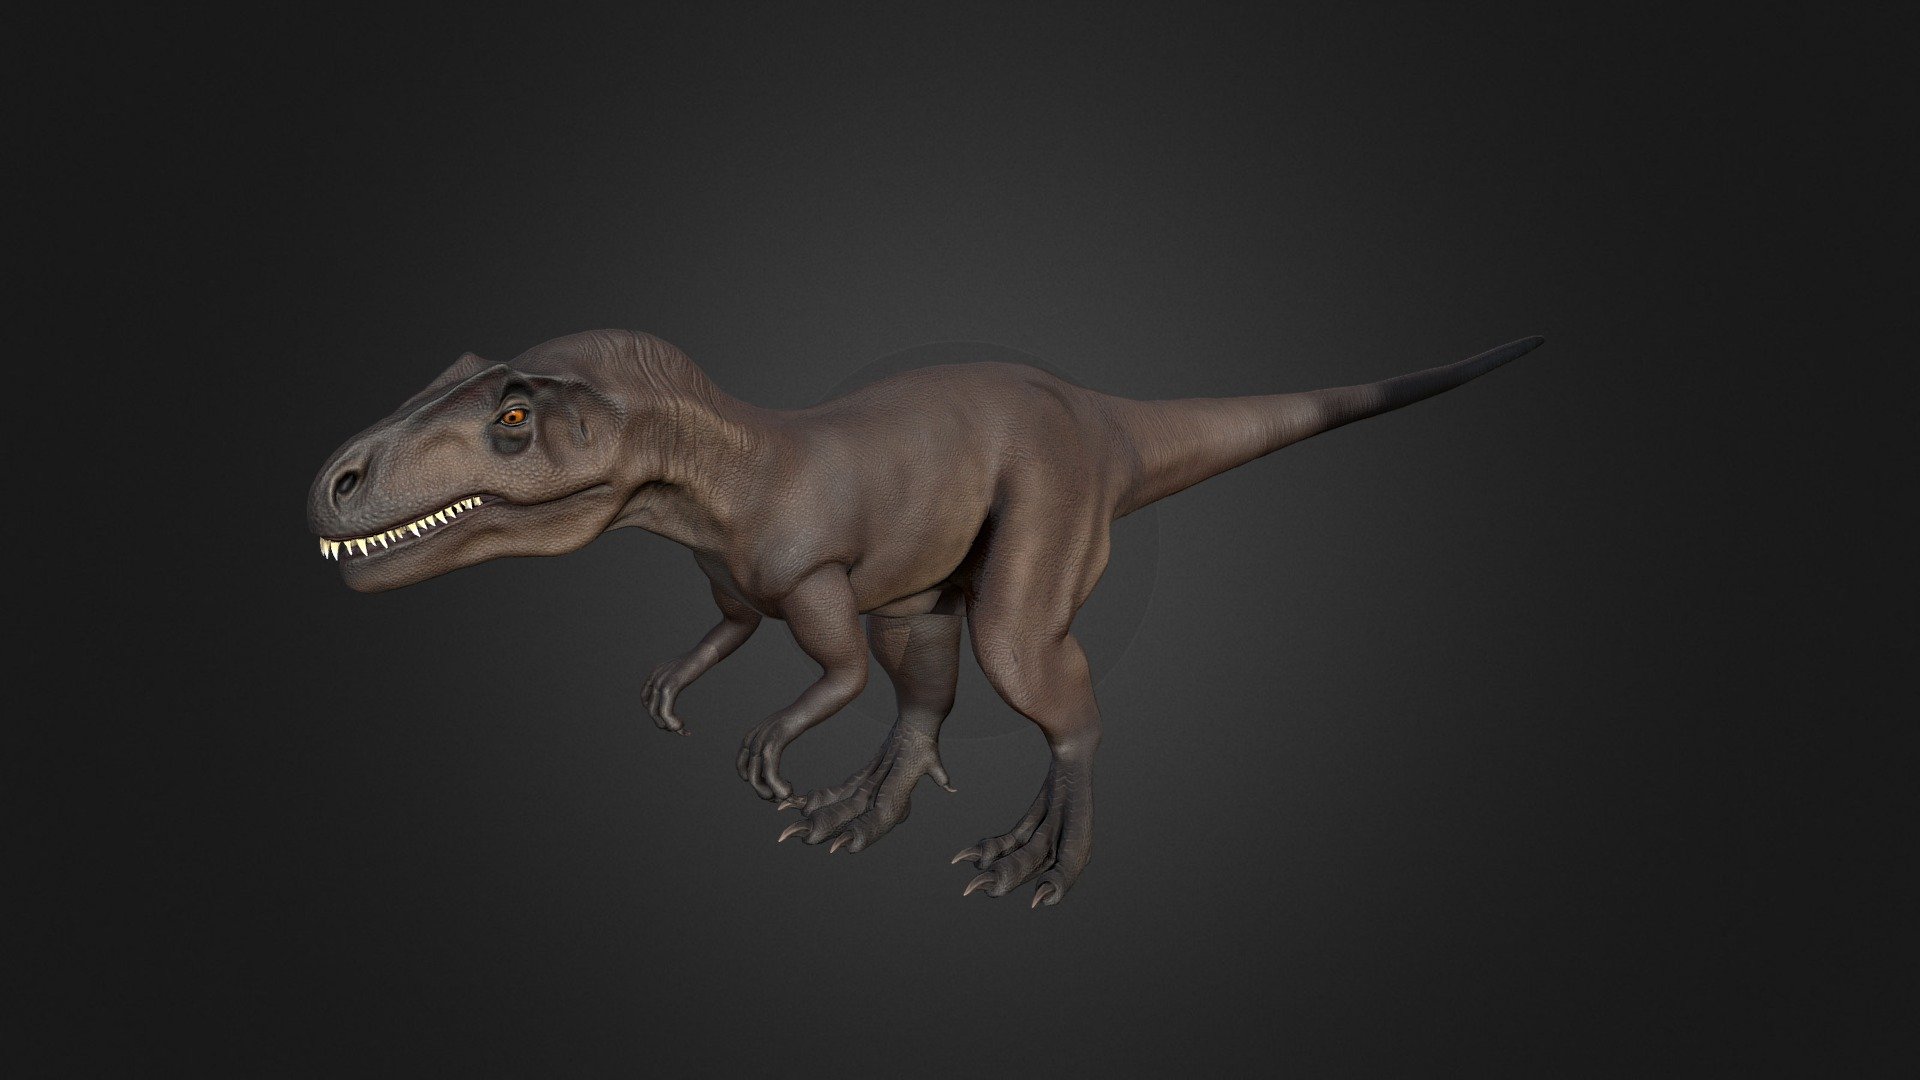 This asset has Allosaurus model.

Model has 4 LOD.


27050 tris
17450 tris
9950 tris
6350 tris

Diffuse, normal and metallic / roughness maps (all maps 2048x2048).

105 animations (IP/RM)

Attack(1-6), Walk (F,FL,FR,B,BL,BR), Run (F,FL,FR),Run_attack(1-2), Run_Jump, Trot (F,FL,FR), Trot_Attack(1-2), Swim (F,FL,FR,), Swim_Idle, Swim_turn(Left/Right), Jump_In_Place, Jump_F, Jump (start/landing), Jump_Loop (up, horisontal, down),Hit (F,M,B)(1-2) , Lie (Start/end), Lie_Idle, Sleep (start, idle, end),Sit_Idle (1-2), Sit (start/end), Idle 1-3,Roar 1-2,Roar (run/walk/trot), death (1-3), eat (1-2), pick up food (1-2),Drink start/end, Drink_Idle(1-2) ,Turn (left/right)(45/90*) etc.

If you have any questions, please contact us by mail: Chester9292@mail.ru - Allosaurus - Buy Royalty Free 3D model by Darina3D 3d model